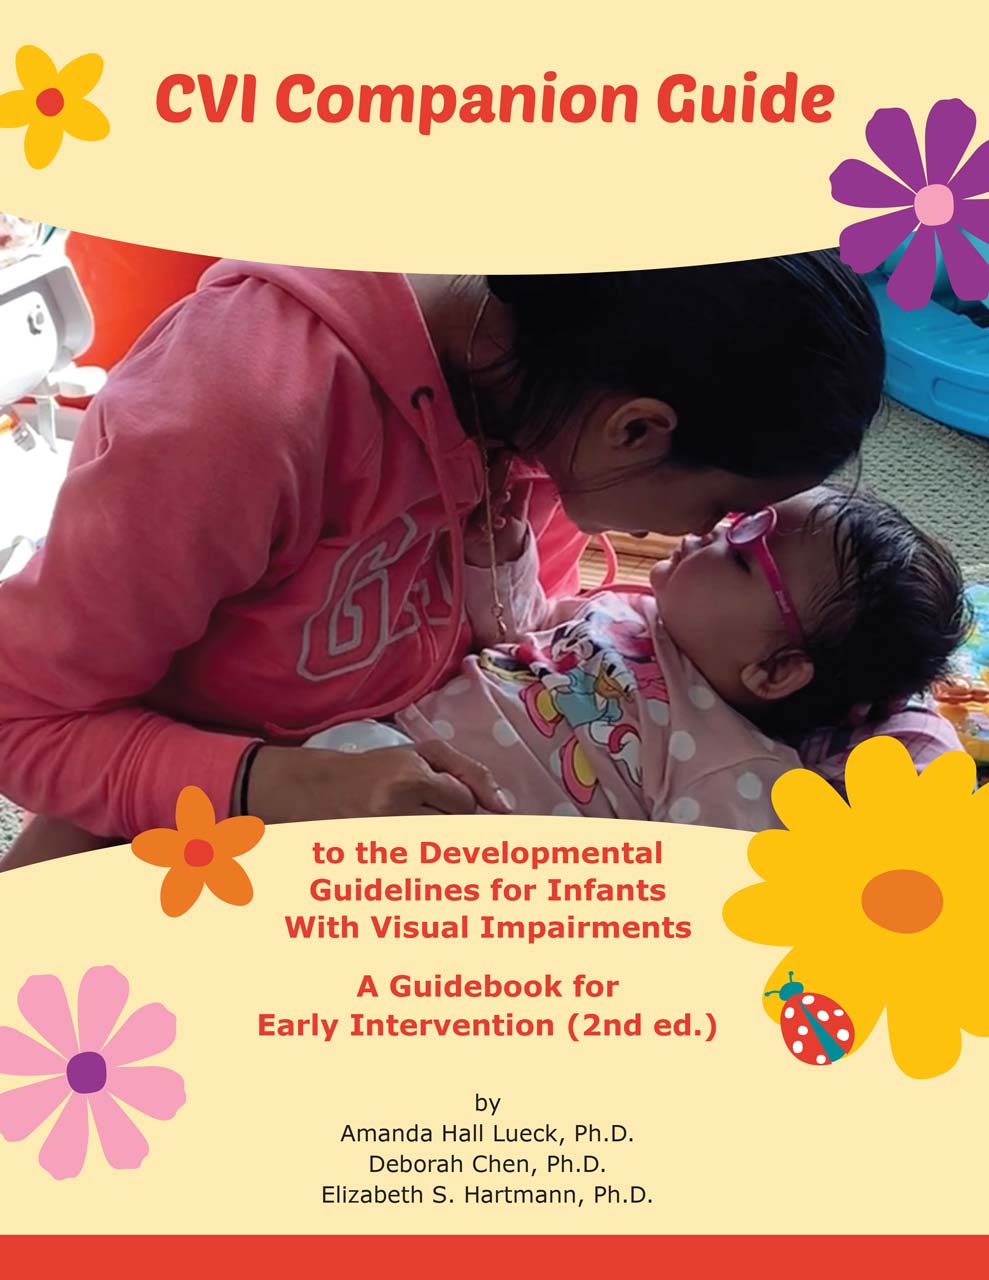 Book cover for CVI Companion Guide showing a woman holding a child in her lap. The child wears glasses. Text reads: "CVI Companion Guide to the Developmental Guidelines for Infants With Visual Impairments: A Guidebook for Early Intervention (2nd ed.) by Amanda Hall Lueck, Ph.D., Deborah Chen, Ph.D., and Elizabeth S. Hartmann, Ph.D."